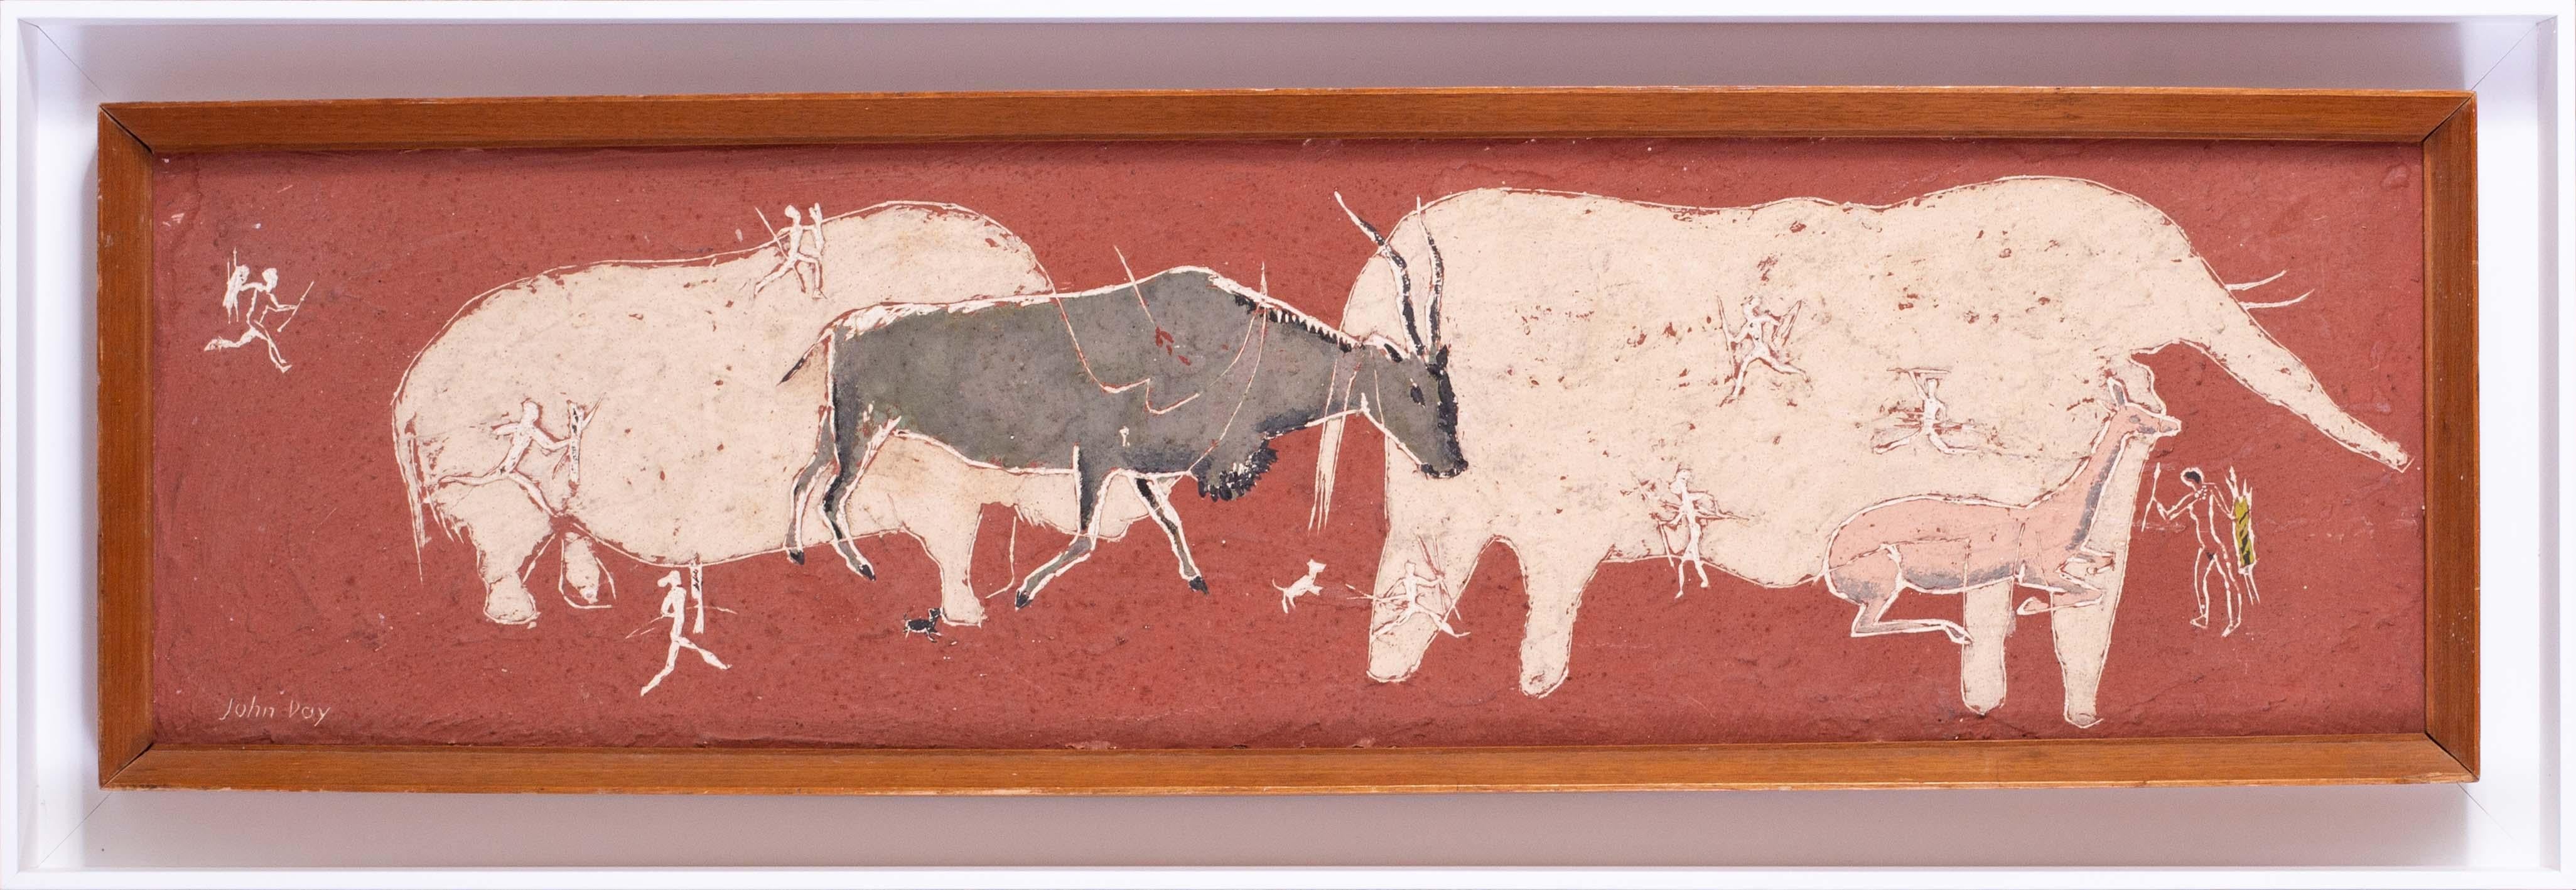 John Day (British, 1932 – 1984)
Cave painting, 1967
Signed ‘John Day’ (lower left)
Mixed media with scraffito
7.1/2 x 29.3/4 in. (19 x 75 cm.) (measured to slip edge)
